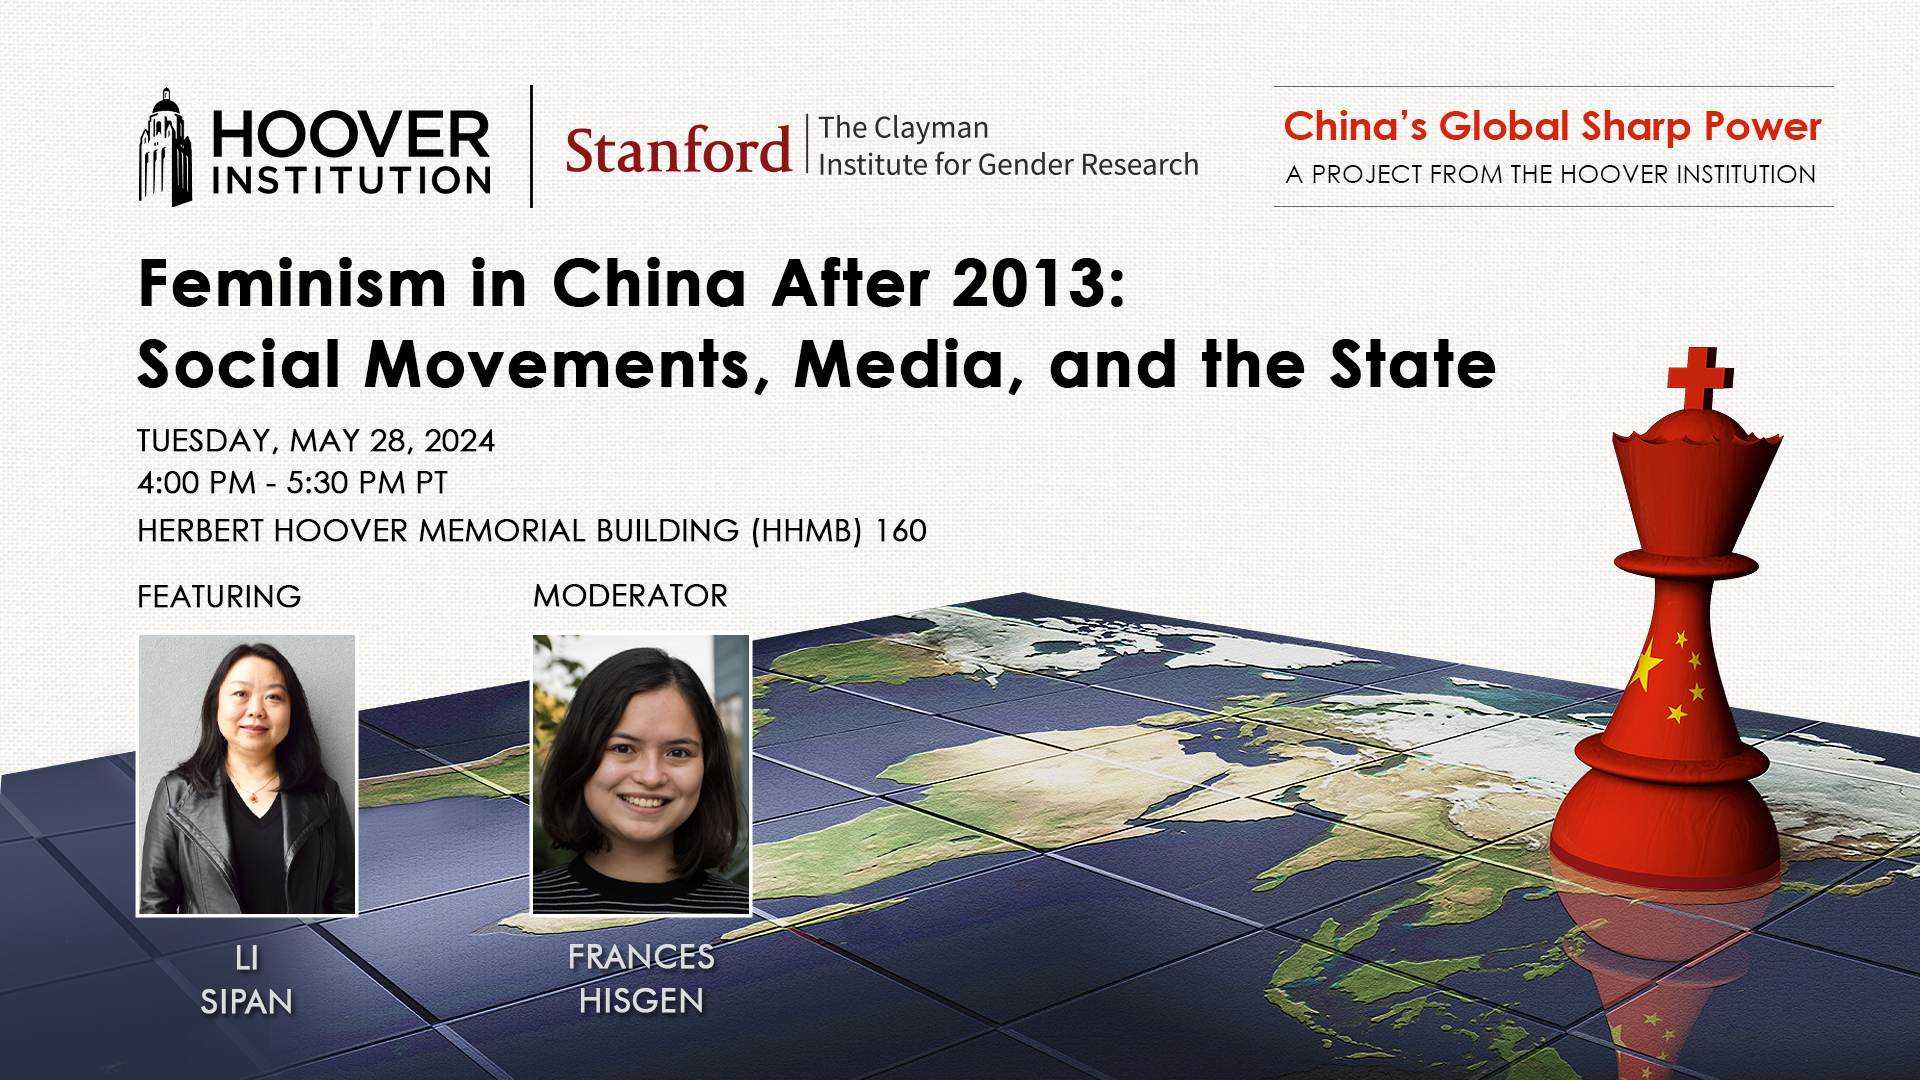 Feminism in China After 2013:  Social Movements, Media, and the State